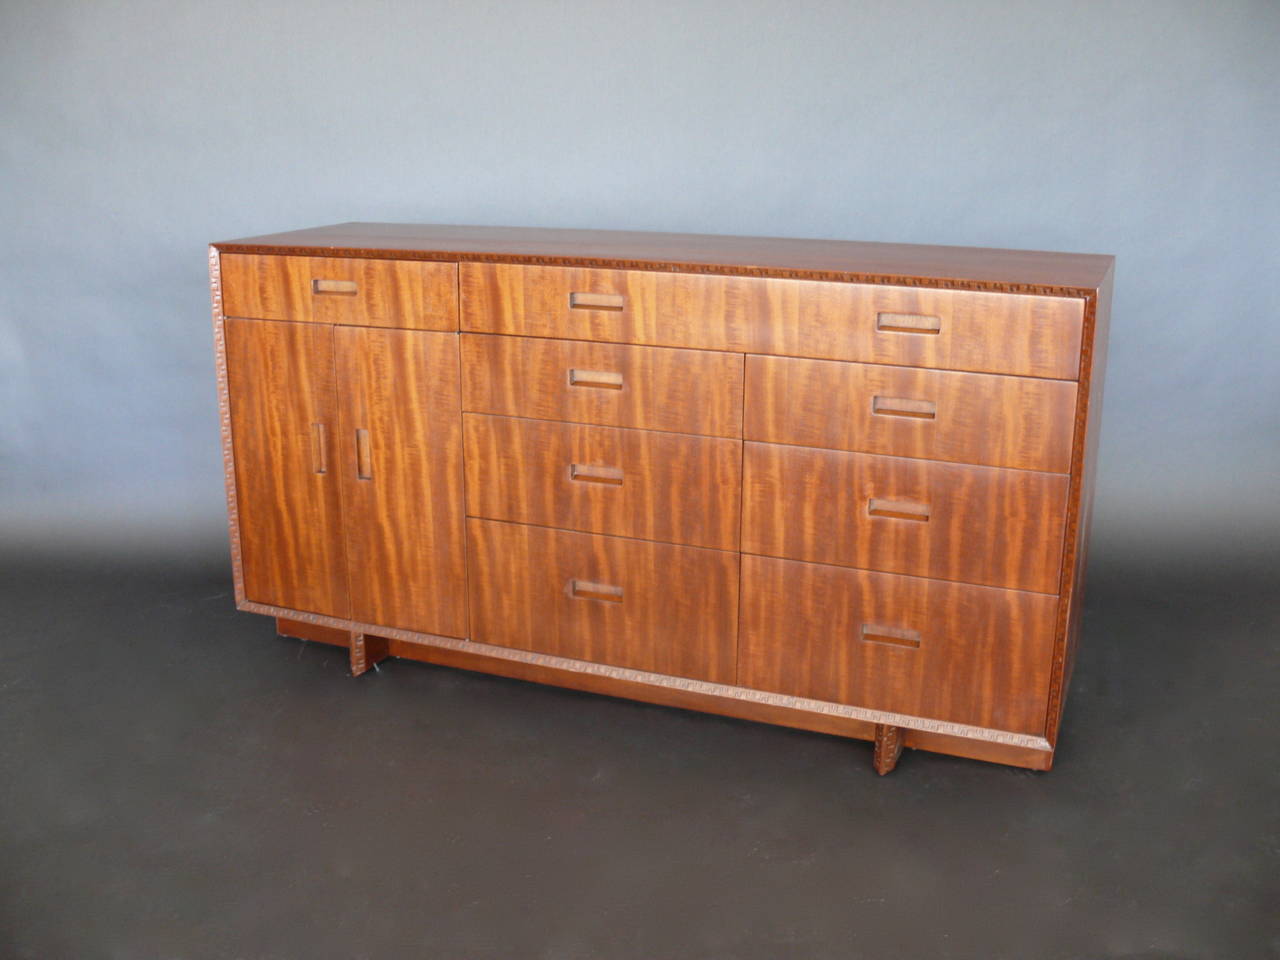 Beautiful dresser by Frank Lloyd Wright manufactured by Heritage Henredon. Distinct carvings from the Taliesin Line which was named after Frank Lloyd Wright's home in Spring Green, Wisconsin. Signed by FLW and newly refinished.